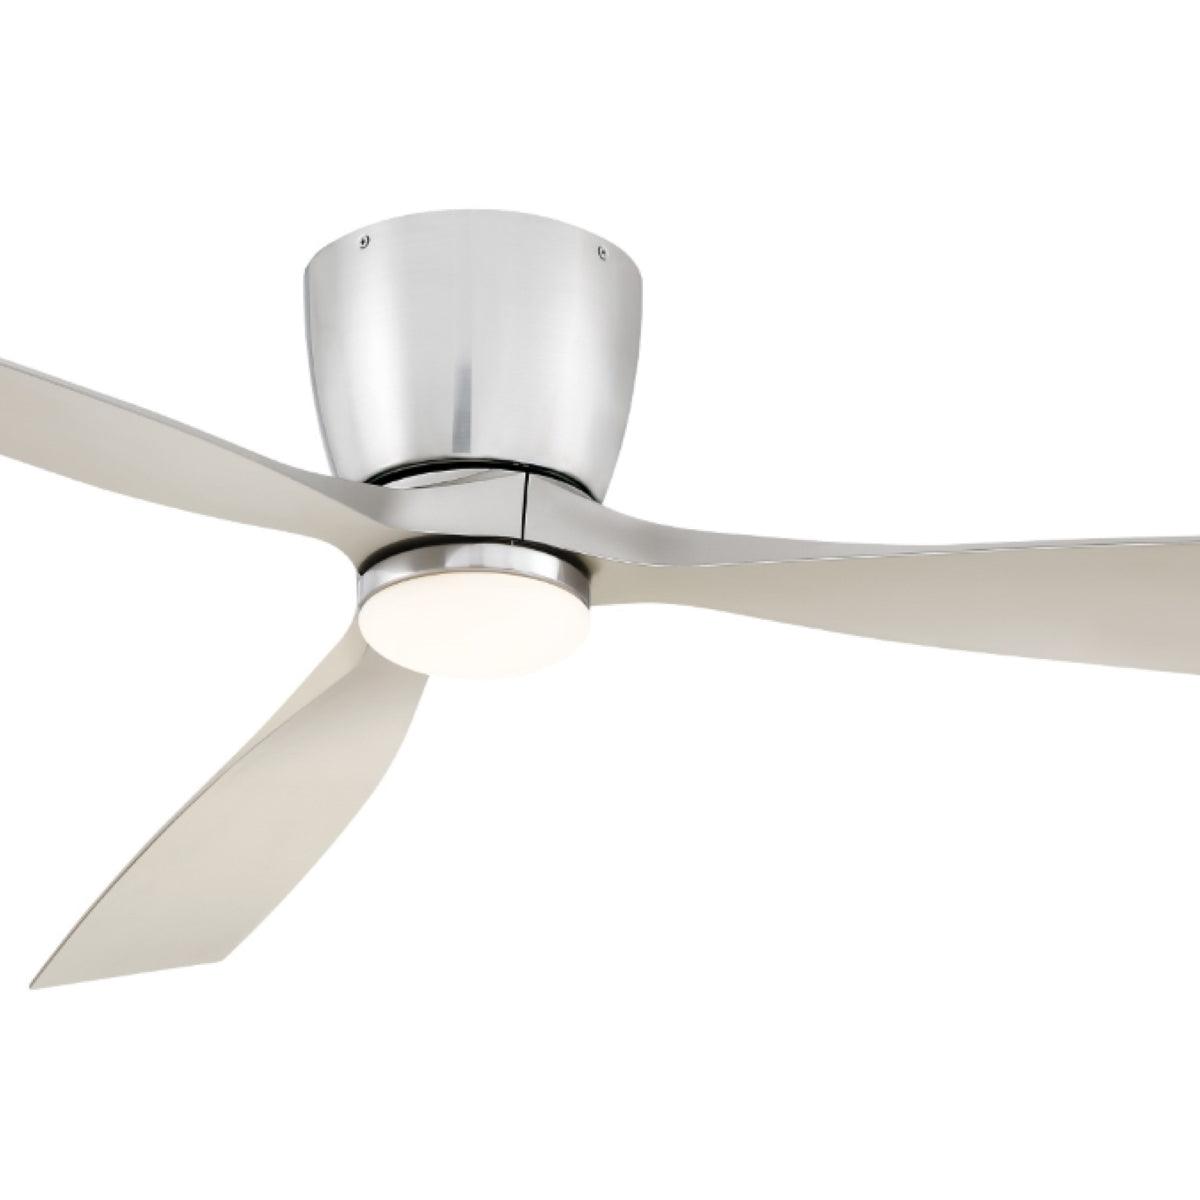 Klinch 52 Inch Low Profile Outdoor Ceiling Fan With Light and Remote